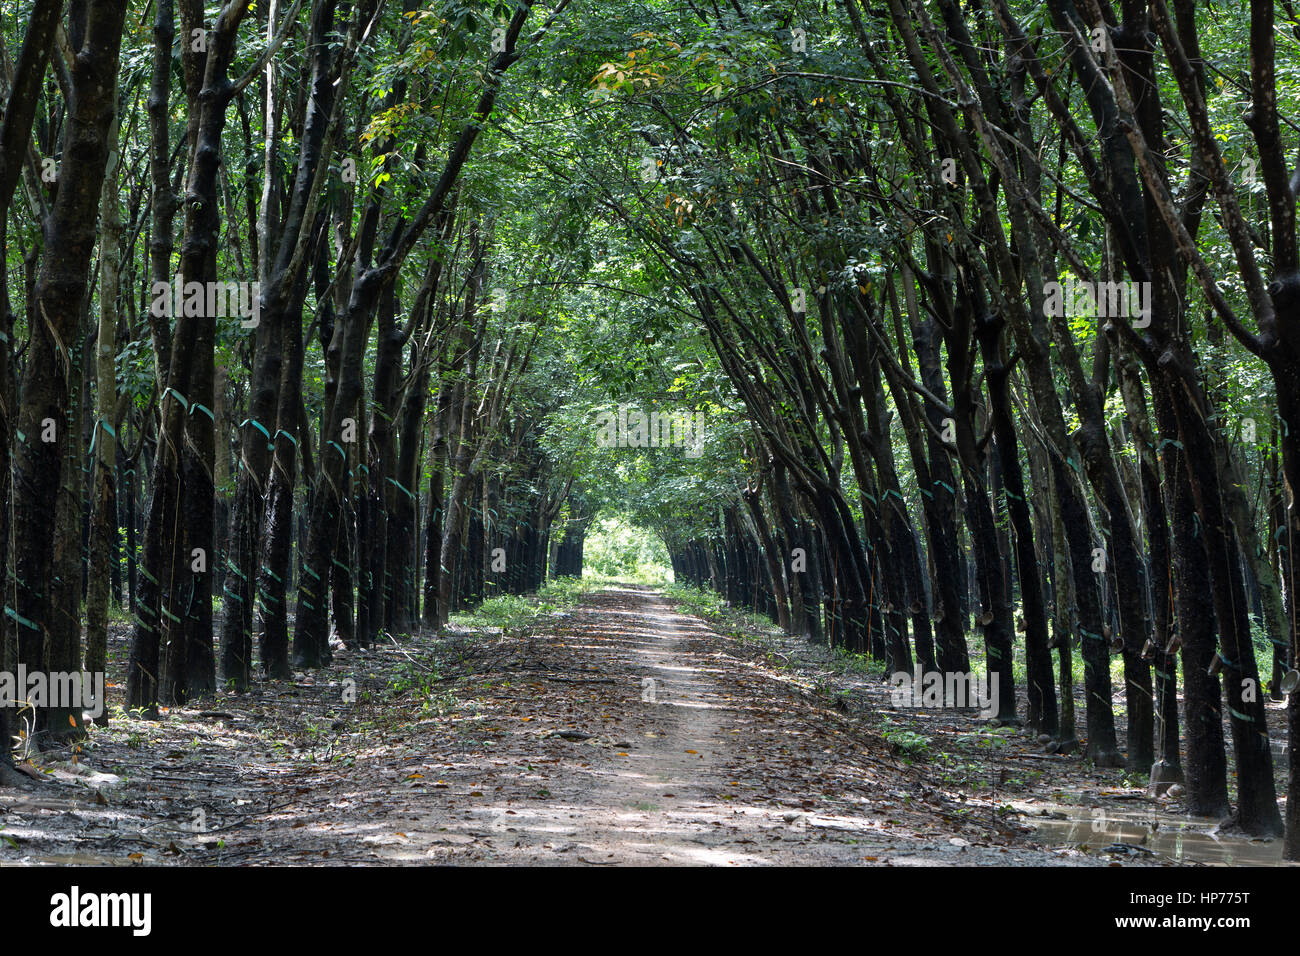 Para Rubber Tree Plantation 'Hevea brasiliensis' , giving a cathedral effect,  converging treeline & roadway, shade with filtered sunlight. Stock Photo